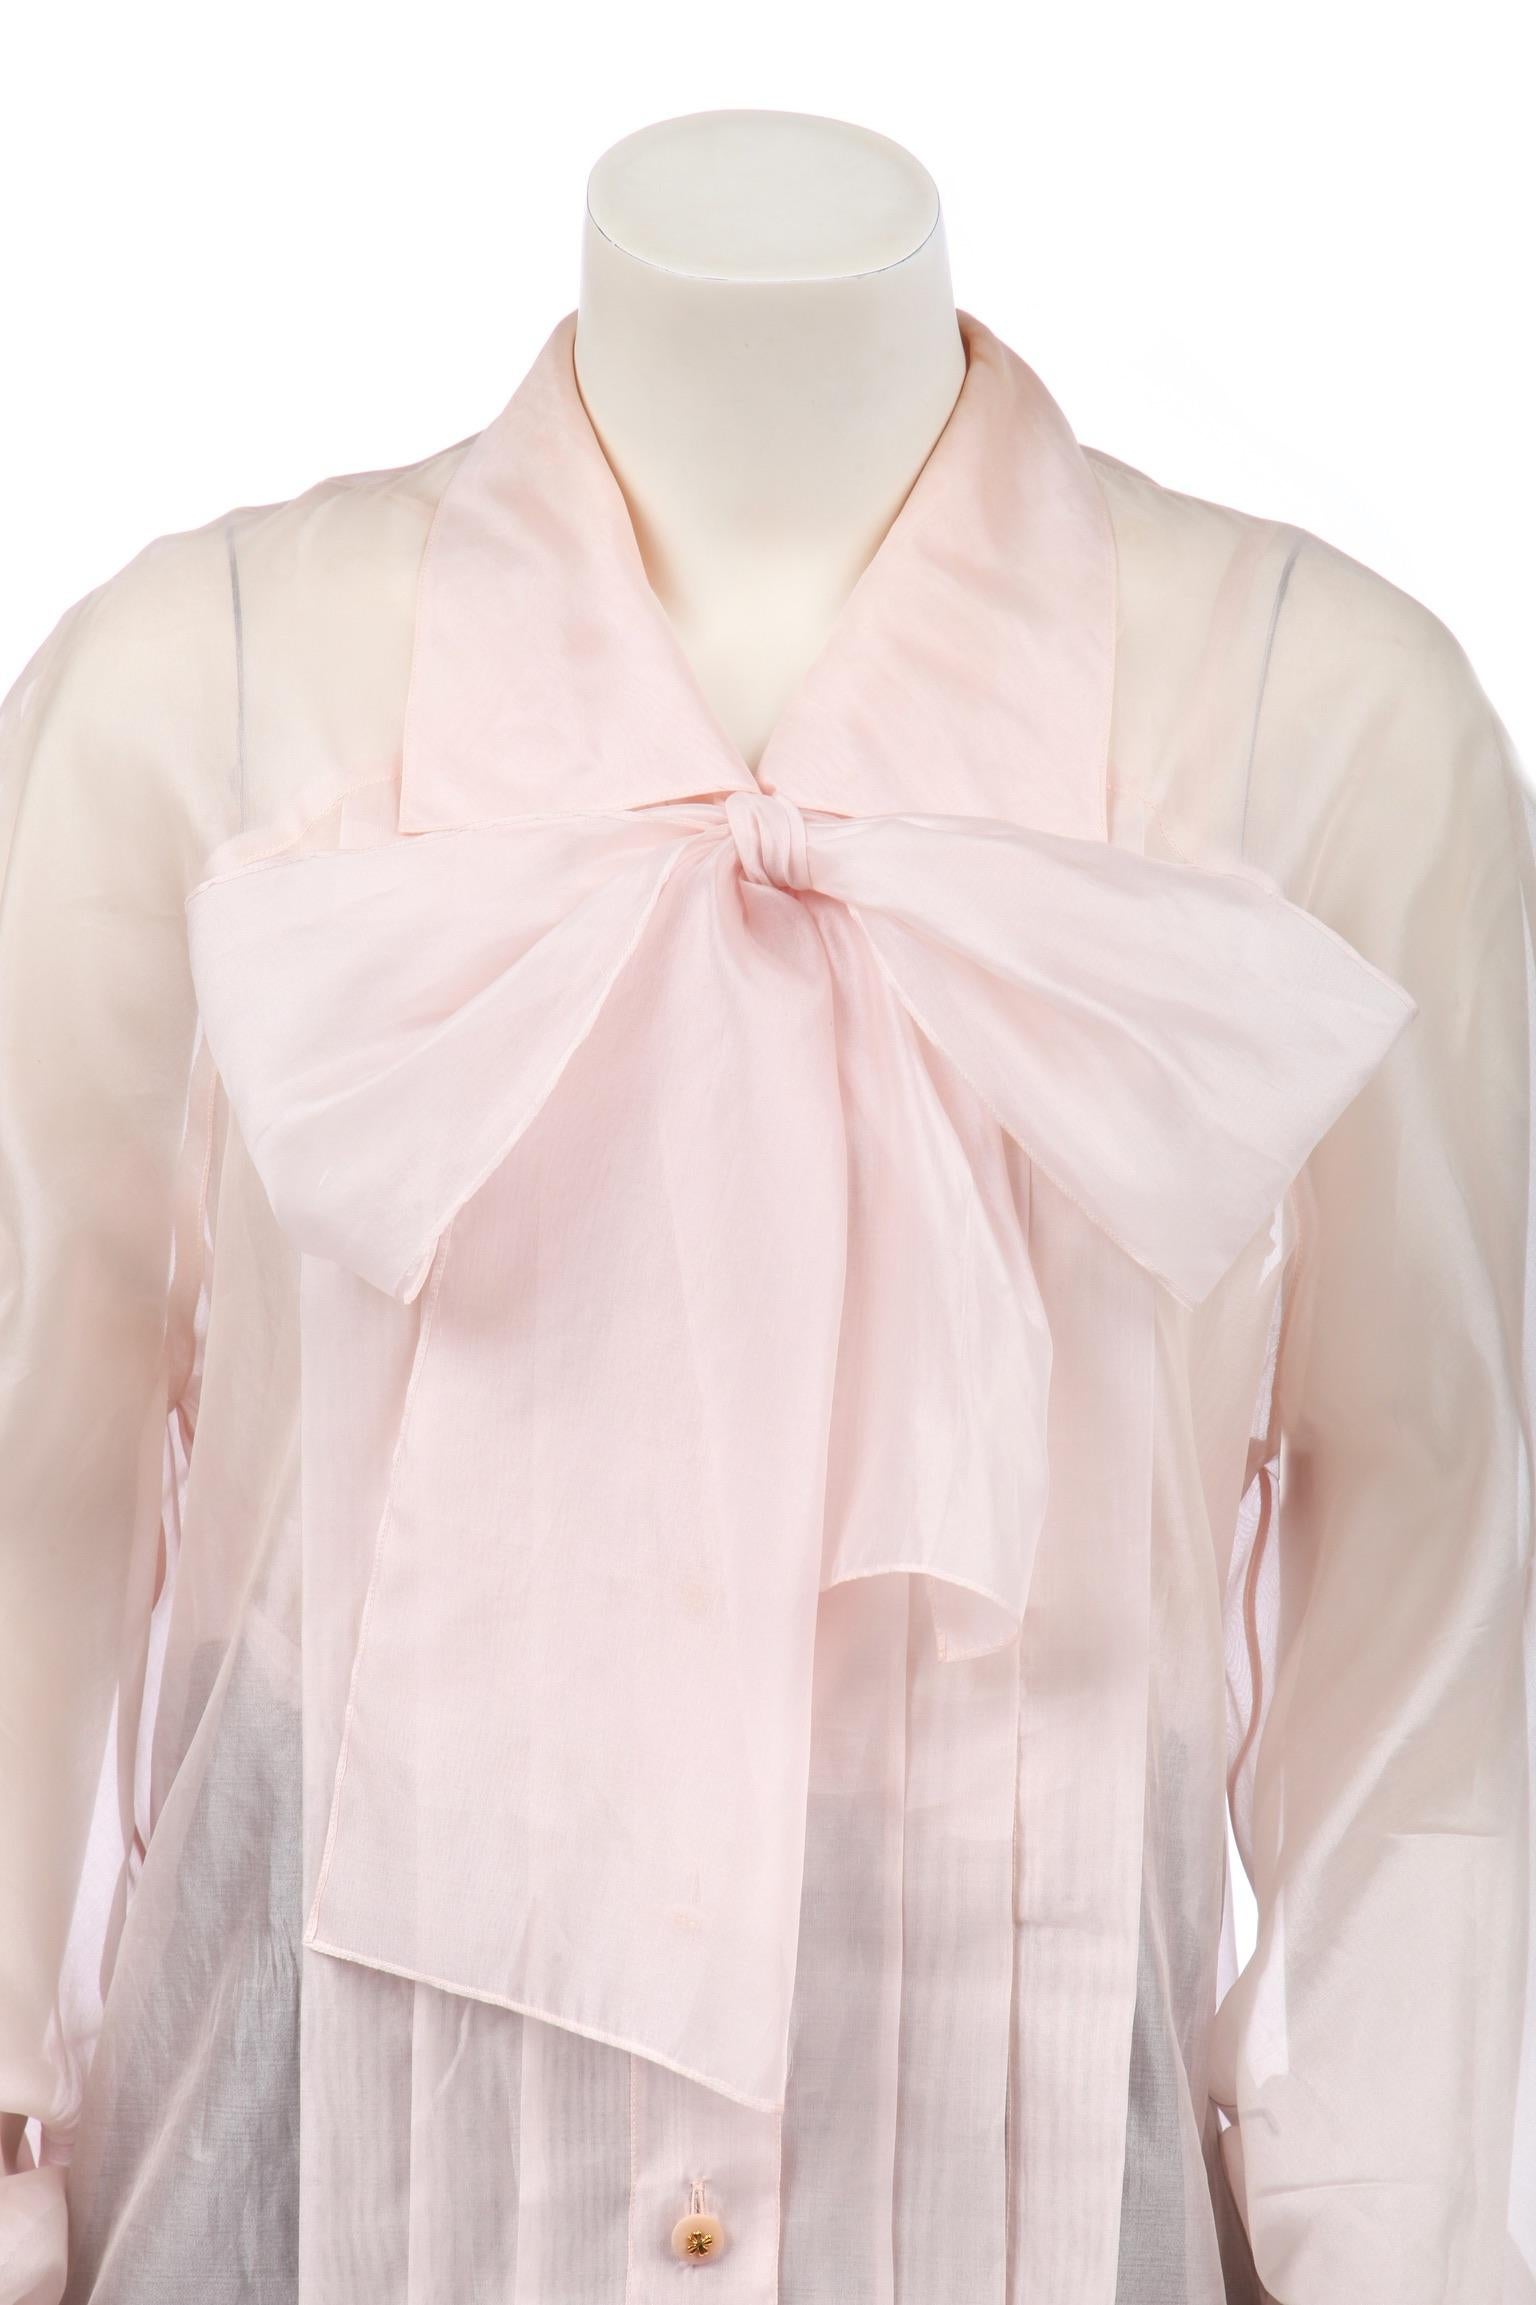 Women's or Men's 1980s Chanel Karl Lagerfeld Blush Pink Silk Organza Bow Blouse with Camisole